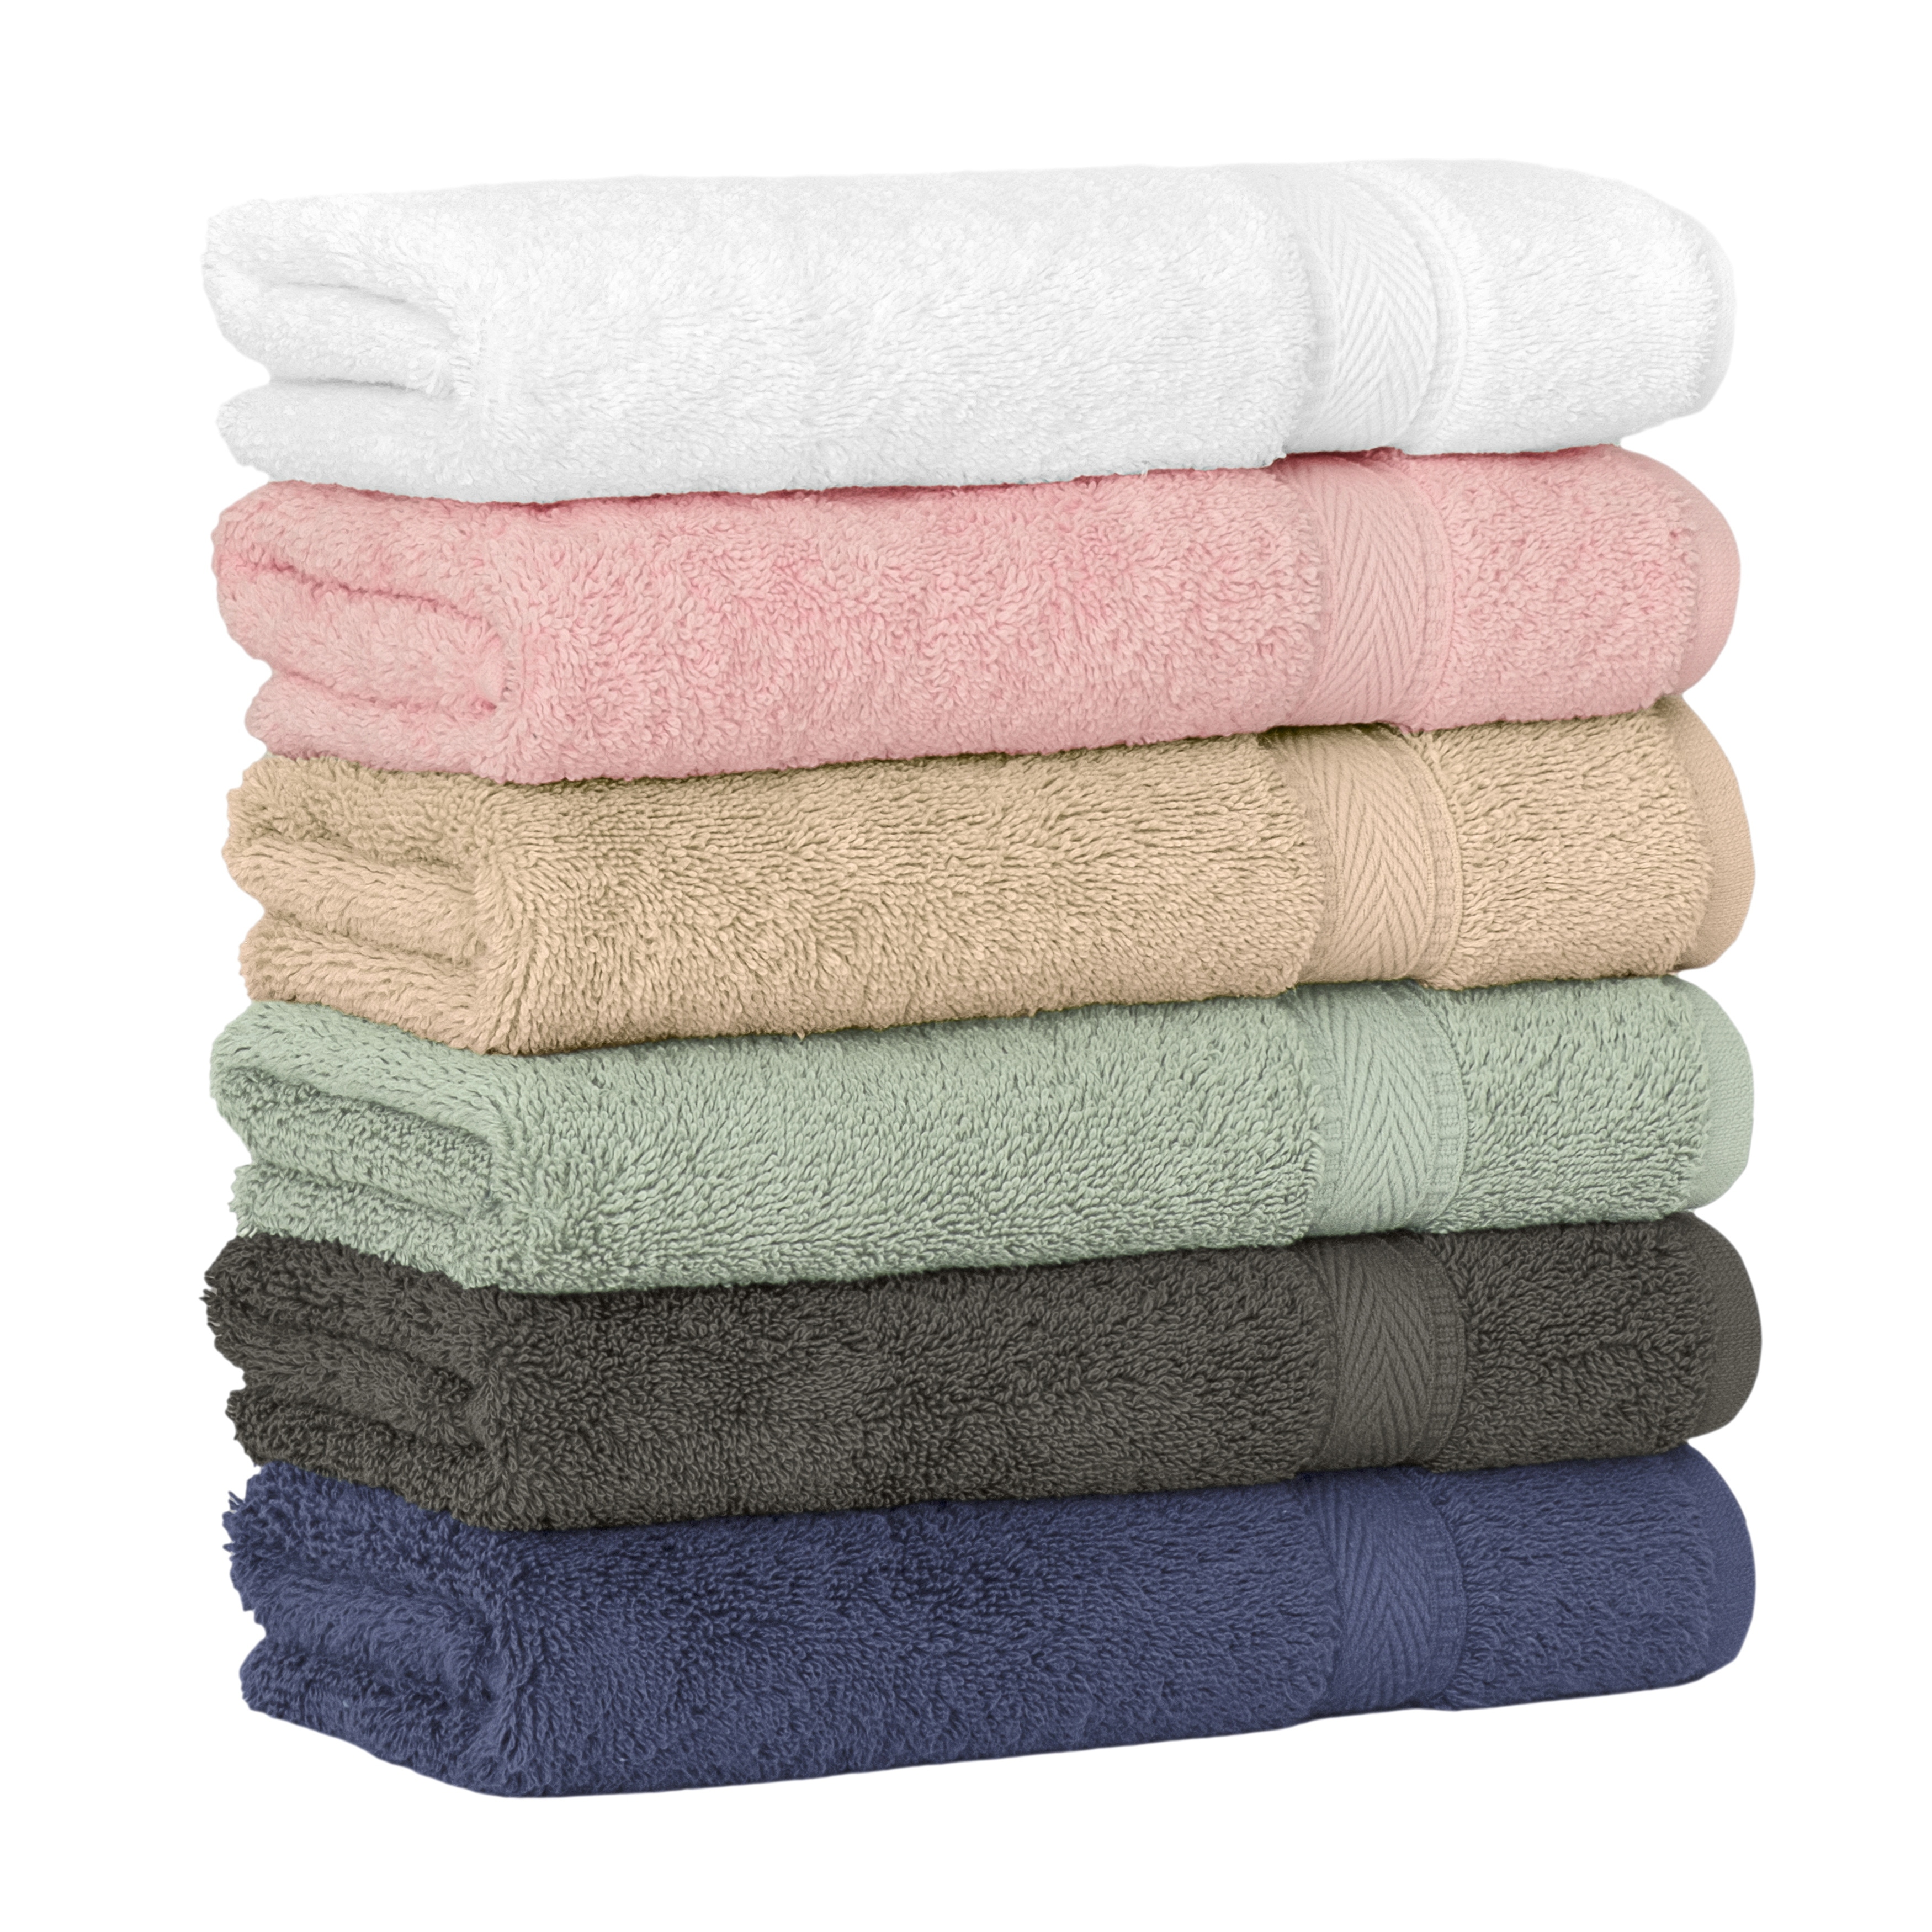 https://ak1.ostkcdn.com/images/products/is/images/direct/b04972de05cb9fcfb8242471680e0b9f08b27c33/Authentic-Hotel-Spa-Turkish-Cotton-Hand-Towels-%28Set-of-4%29.jpg